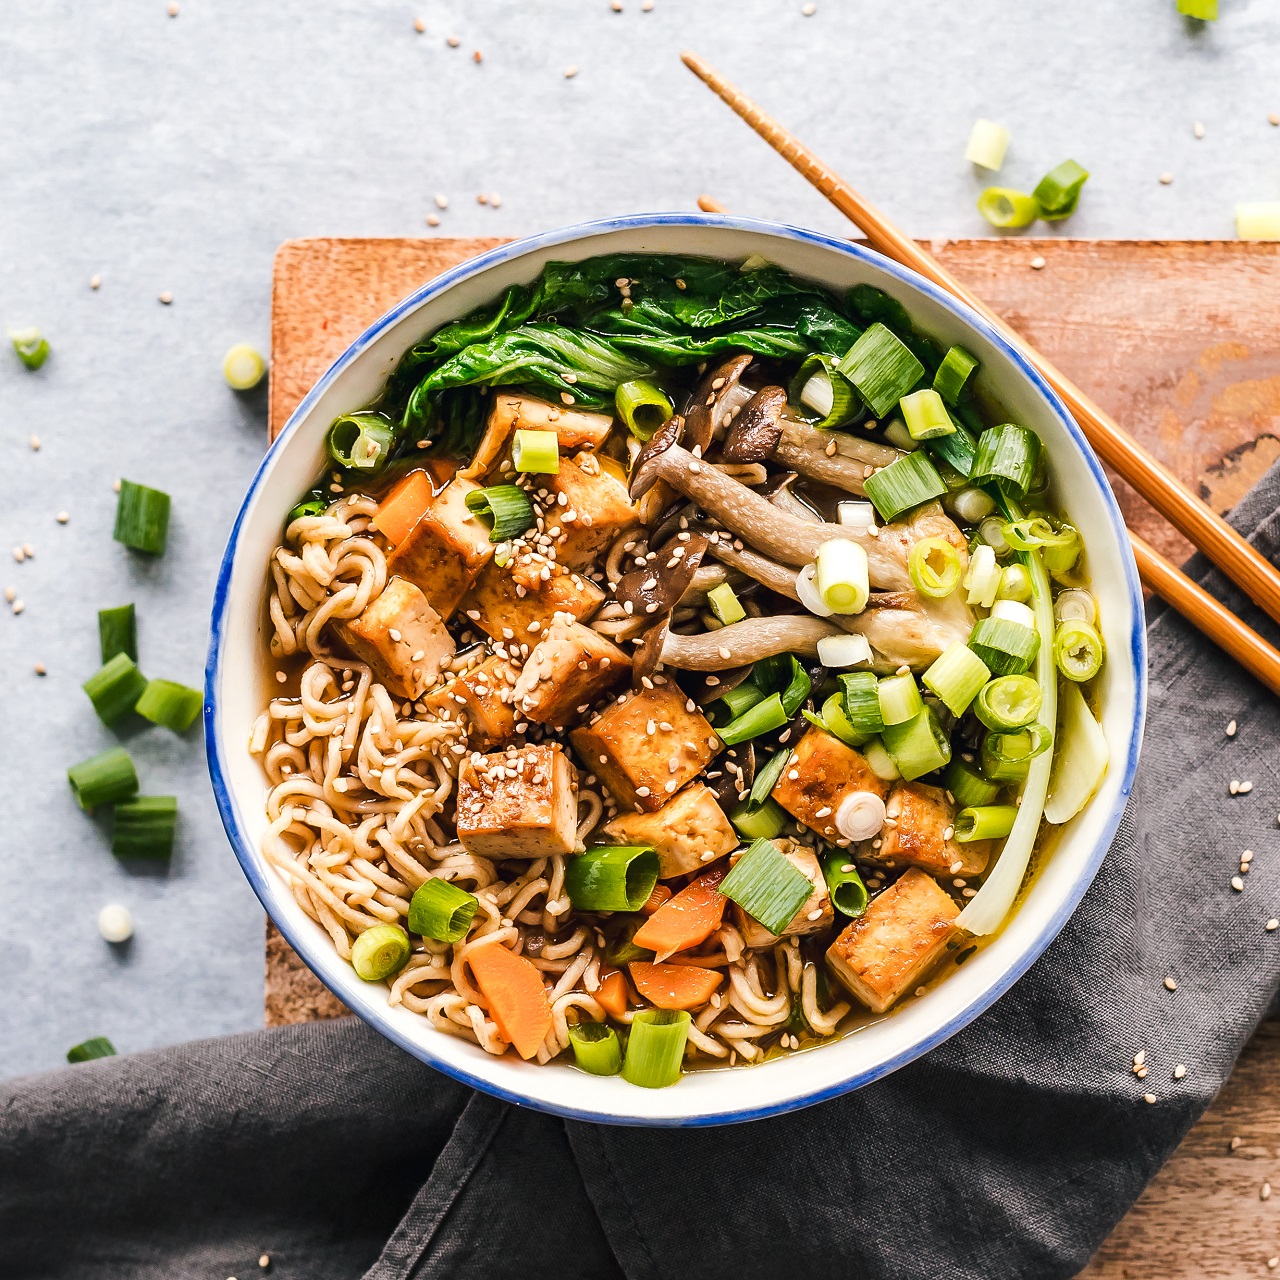 <p>A 2020 Japanese study found that miso, a fermented soybean paste often used for soup, can lower blood pressure, decrease heart rate and calm nerve activity even though it has a high salt content. That's interesting because salt is generally known to provoke the opposite effects.</p>